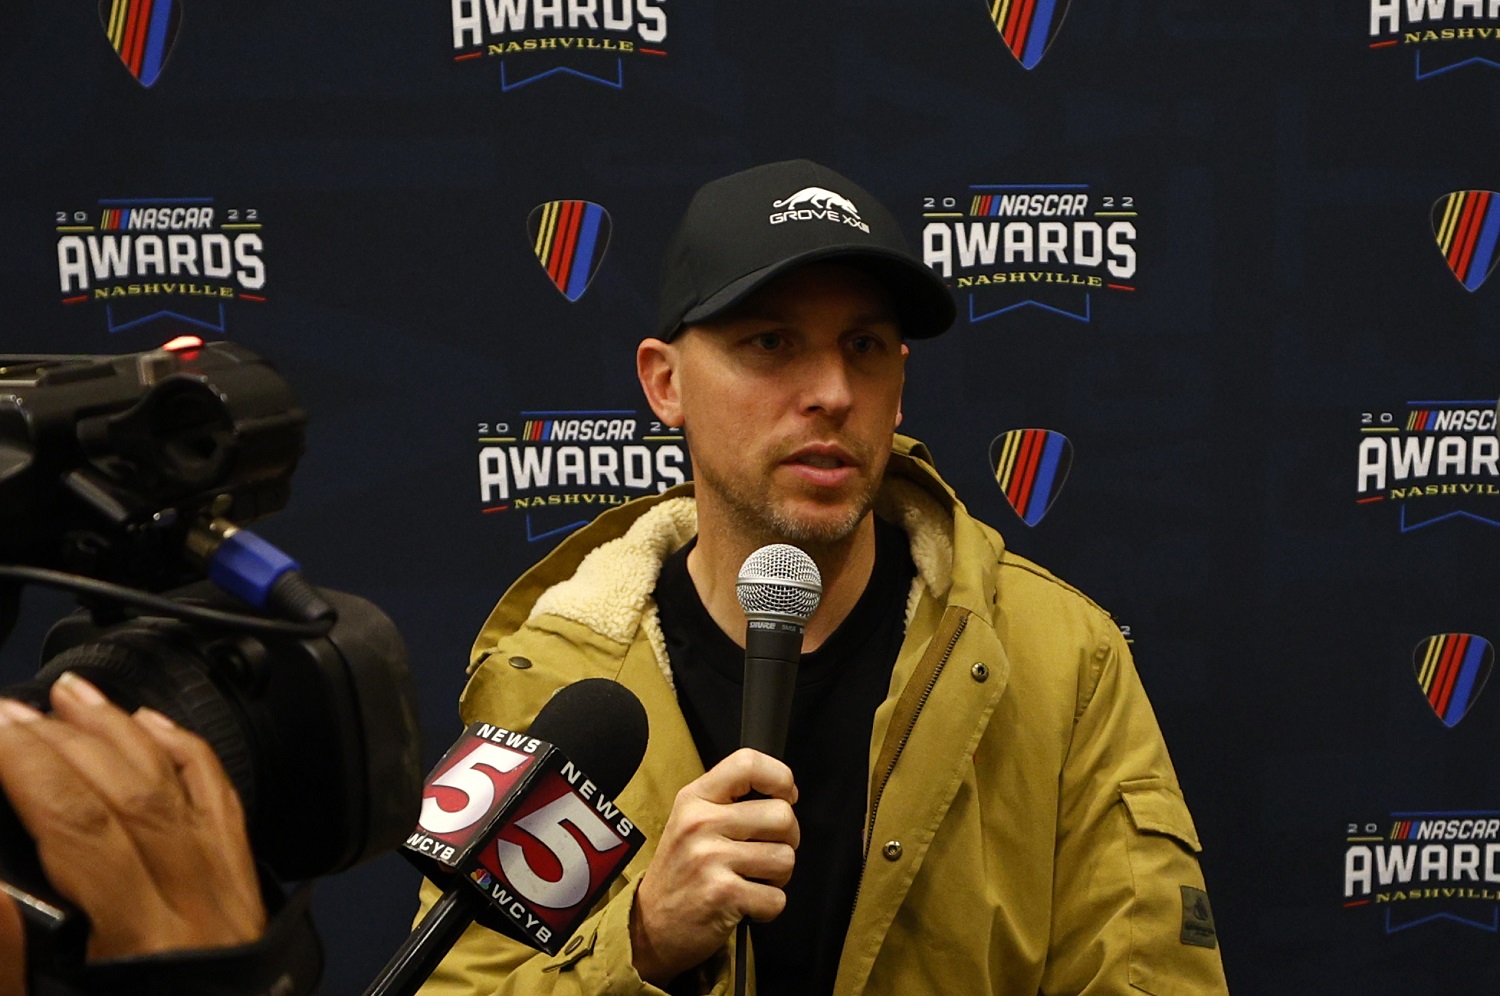 Denny Hamlin speaks with the media prior to the NASCAR Awards and Champion Celebration at the Music City Center on Dec. 2, 2022, in Nashville, Tennessee. | Chris Graythen/Getty Images